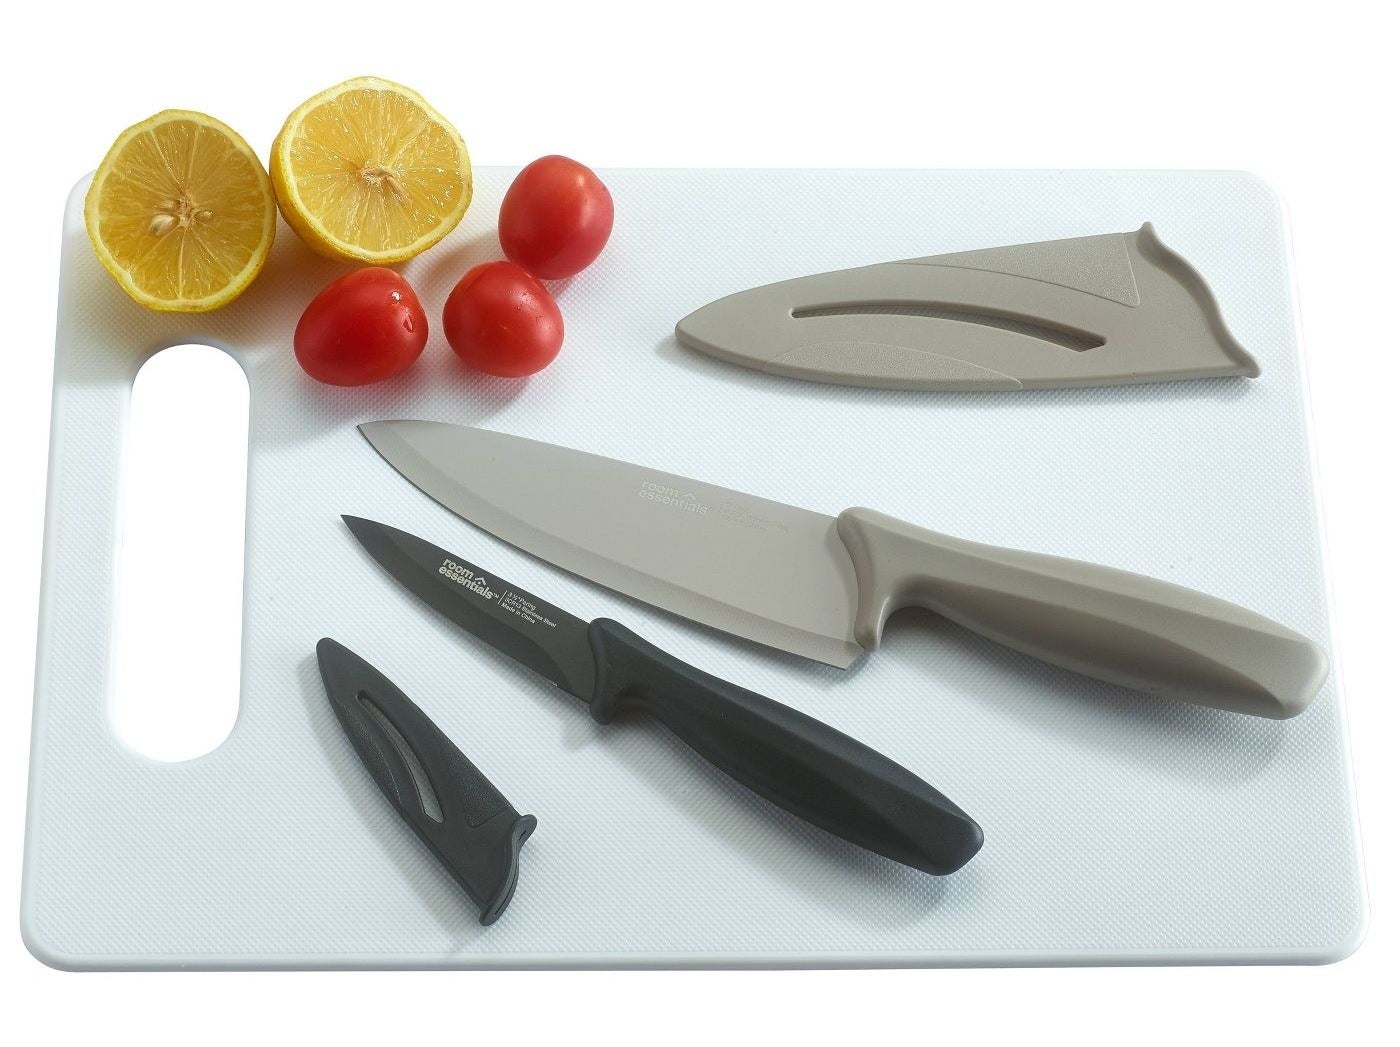 the cutting board with two knives on it and the knives come with blade covers